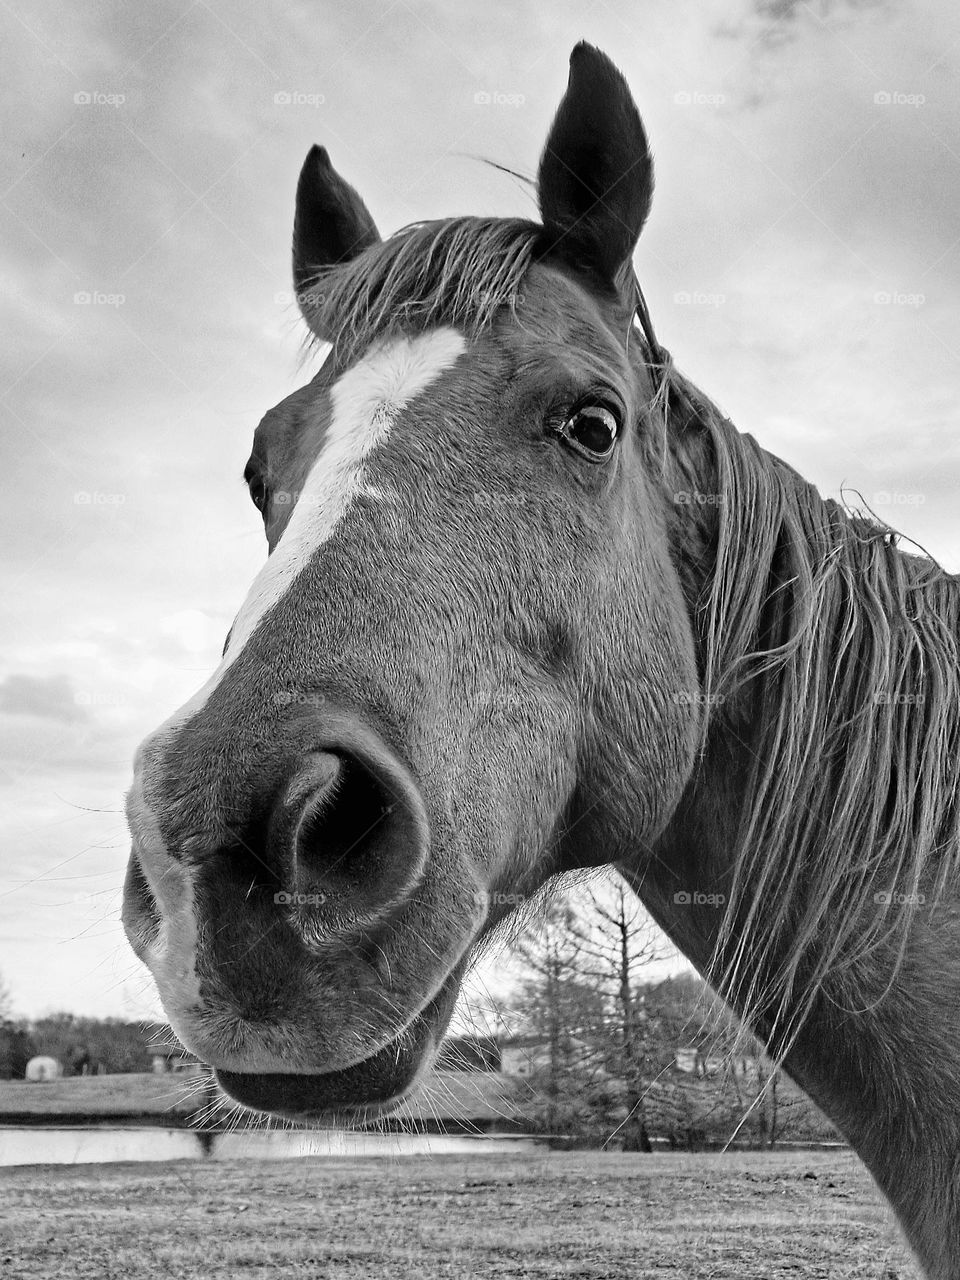 Horse with a blaze face beneath a cloud filled sky in black & white